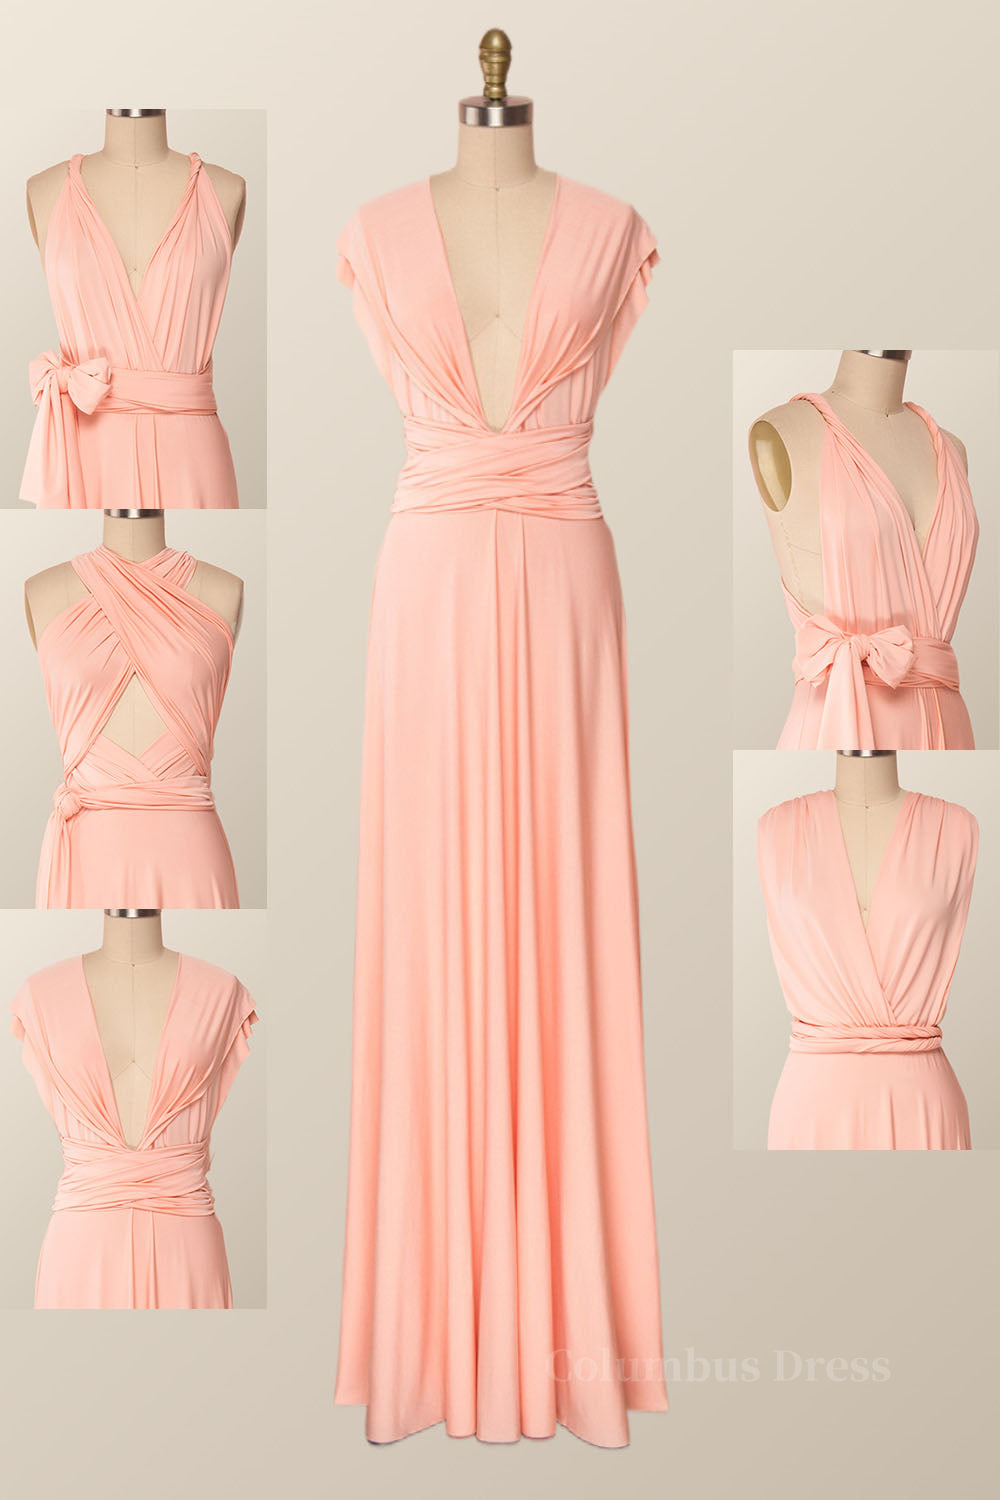 Pink Convertible Long Corset Bridesmaid Dress outfit, Dressy Outfit